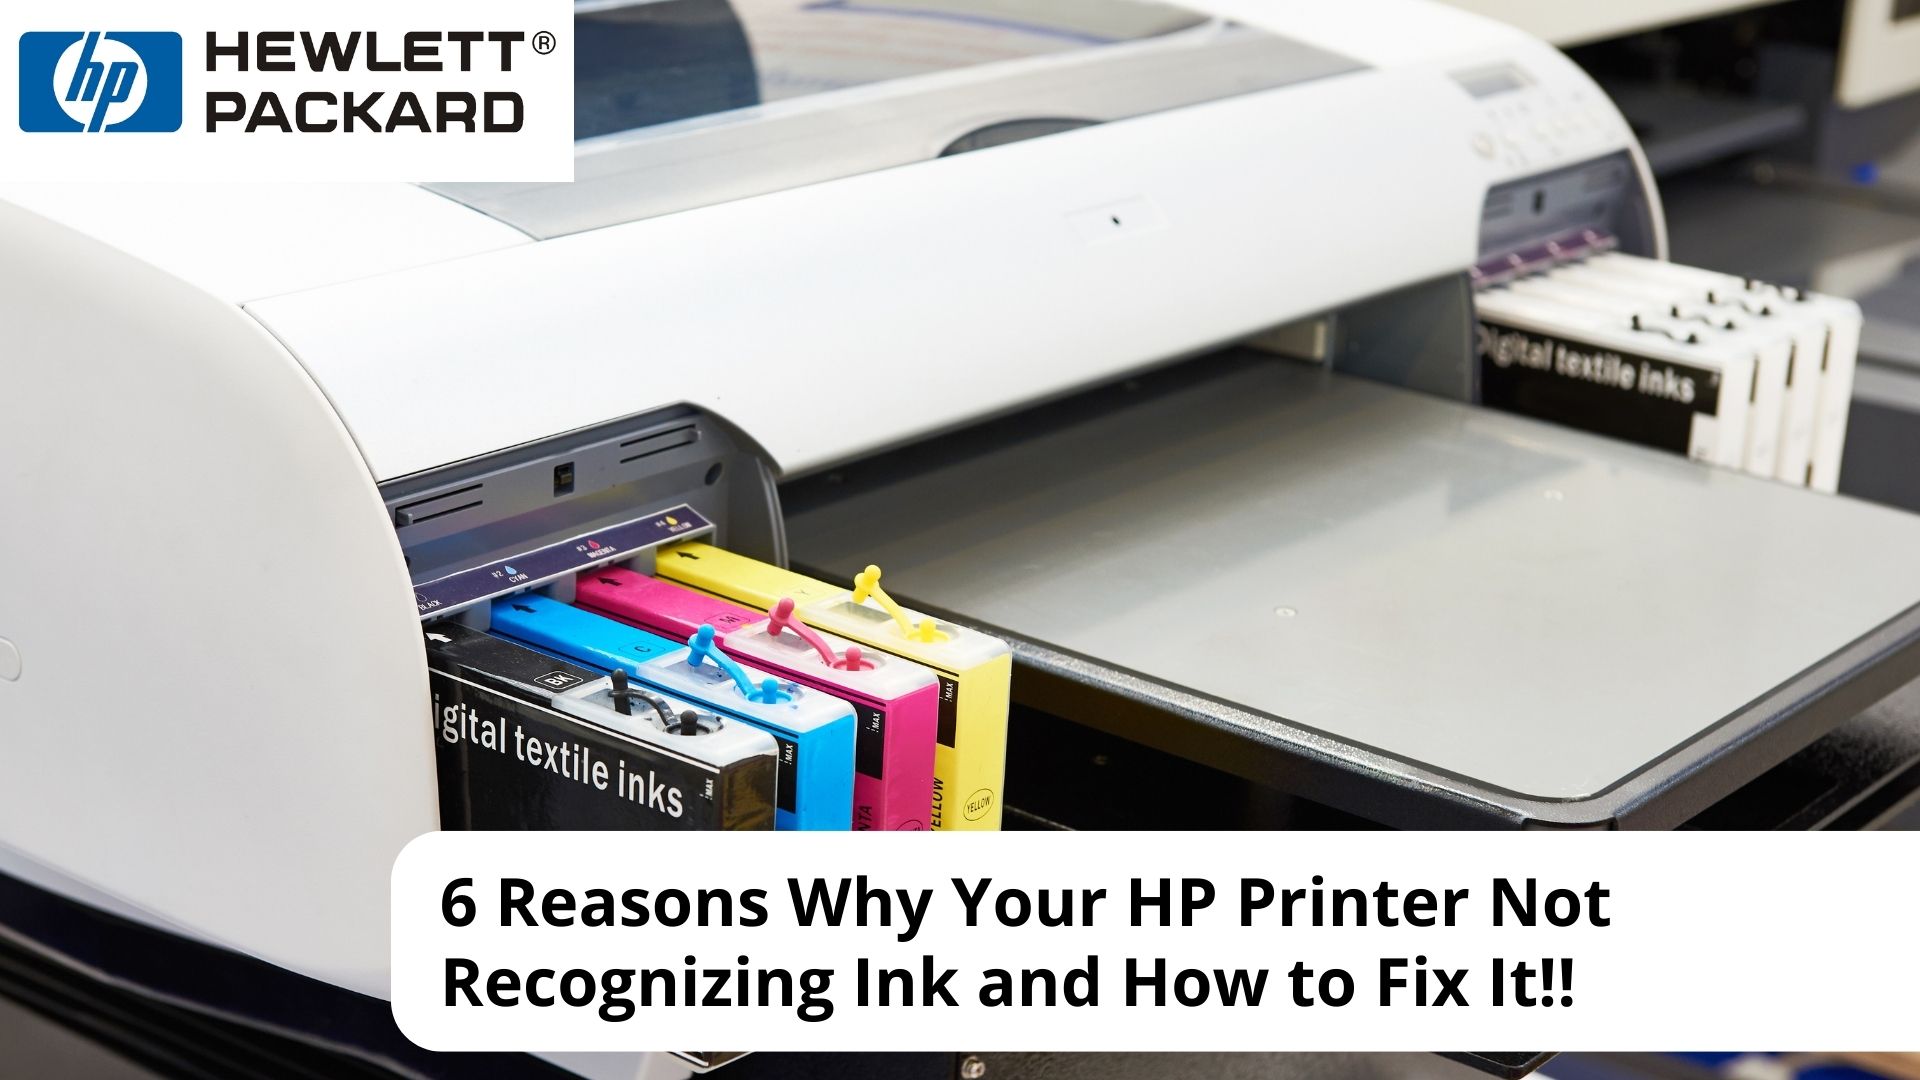 6 Reasons Why Your HP Printer Not Recognizing Ink and How to Fix It!!